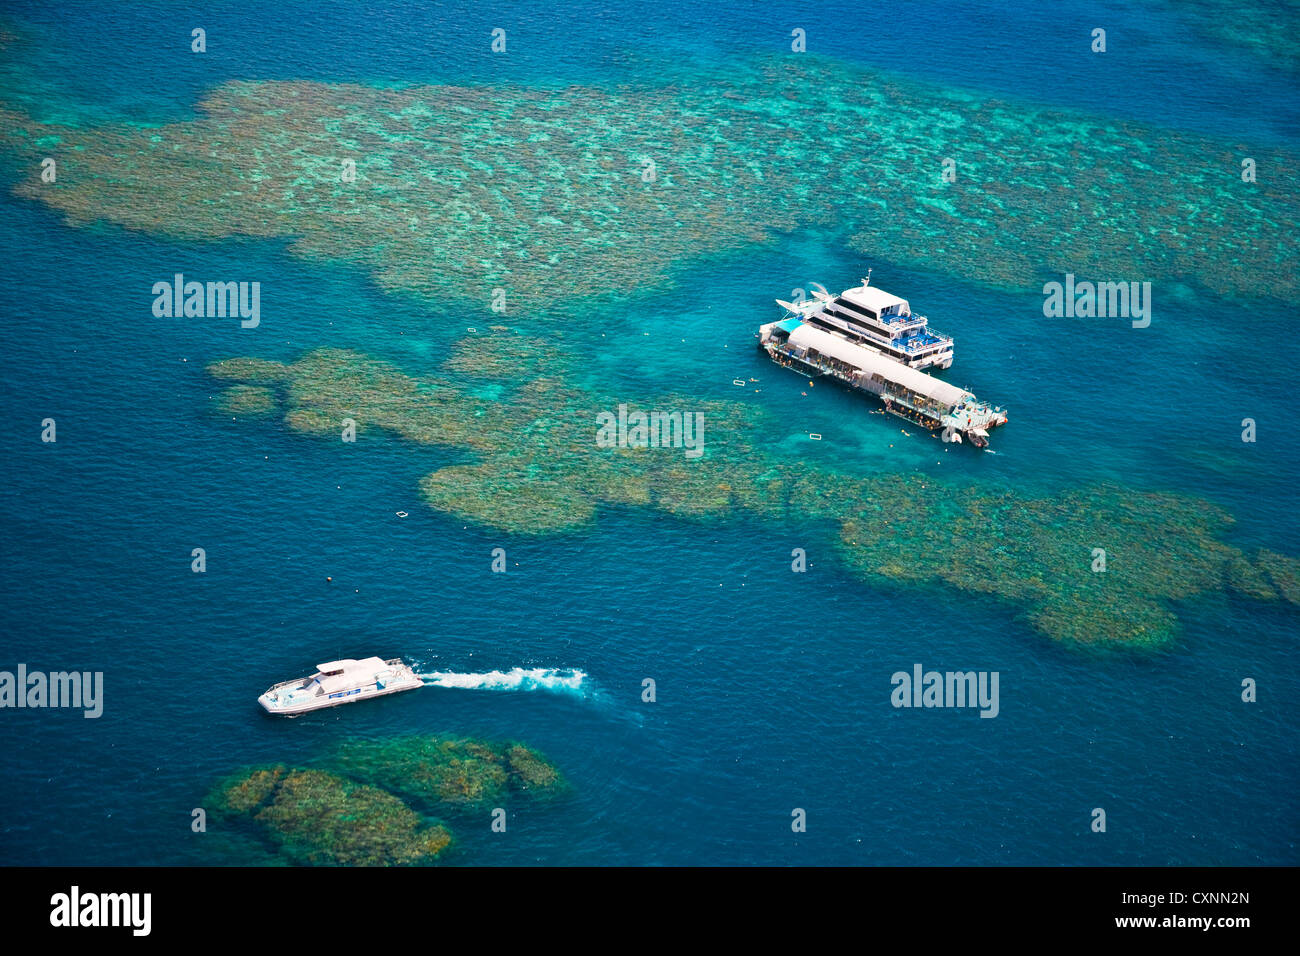 Aerial view of a tour boat docked at a pontoon at the Great Barrier Reef, Queensland, Australia Stock Photo